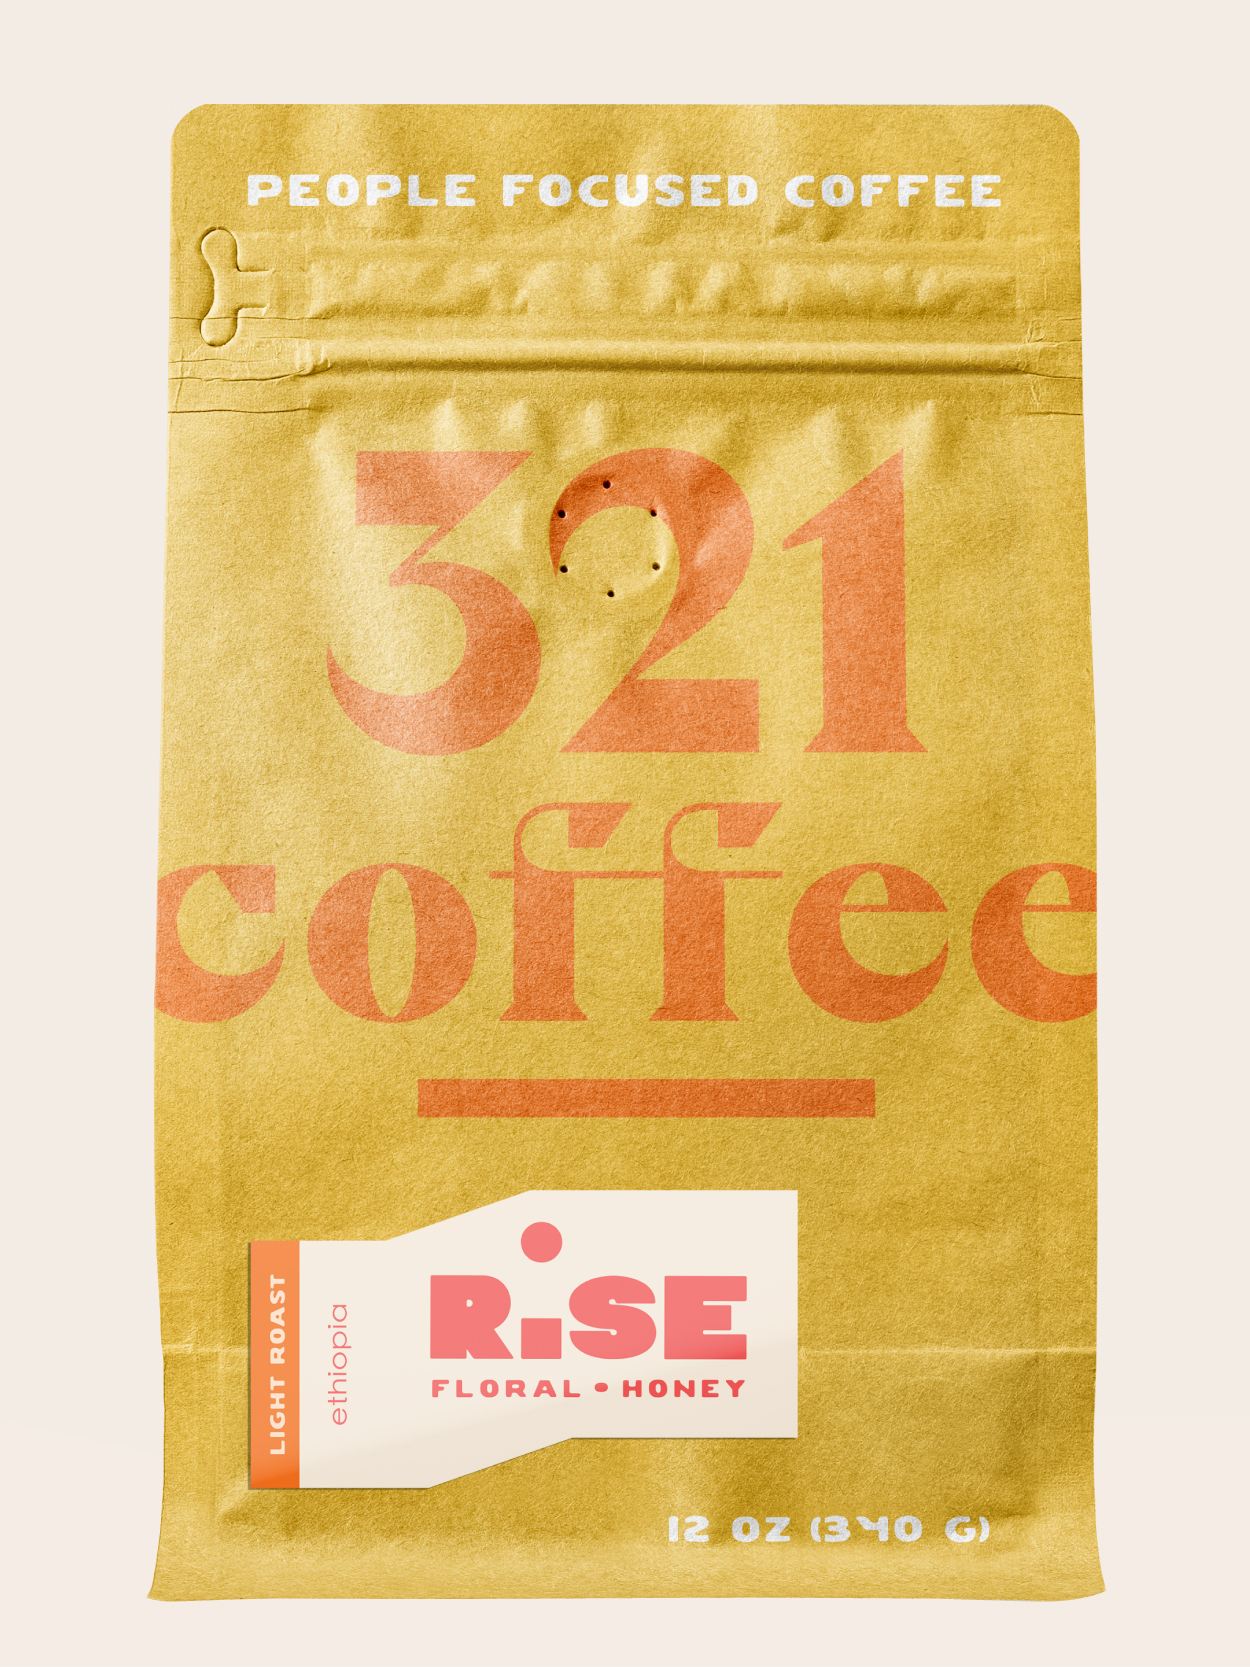 An image of 321's Rise coffee. When hovered over, the text Rise Light Roast, Floral and Honey, Ethiopia, appears above the bag.